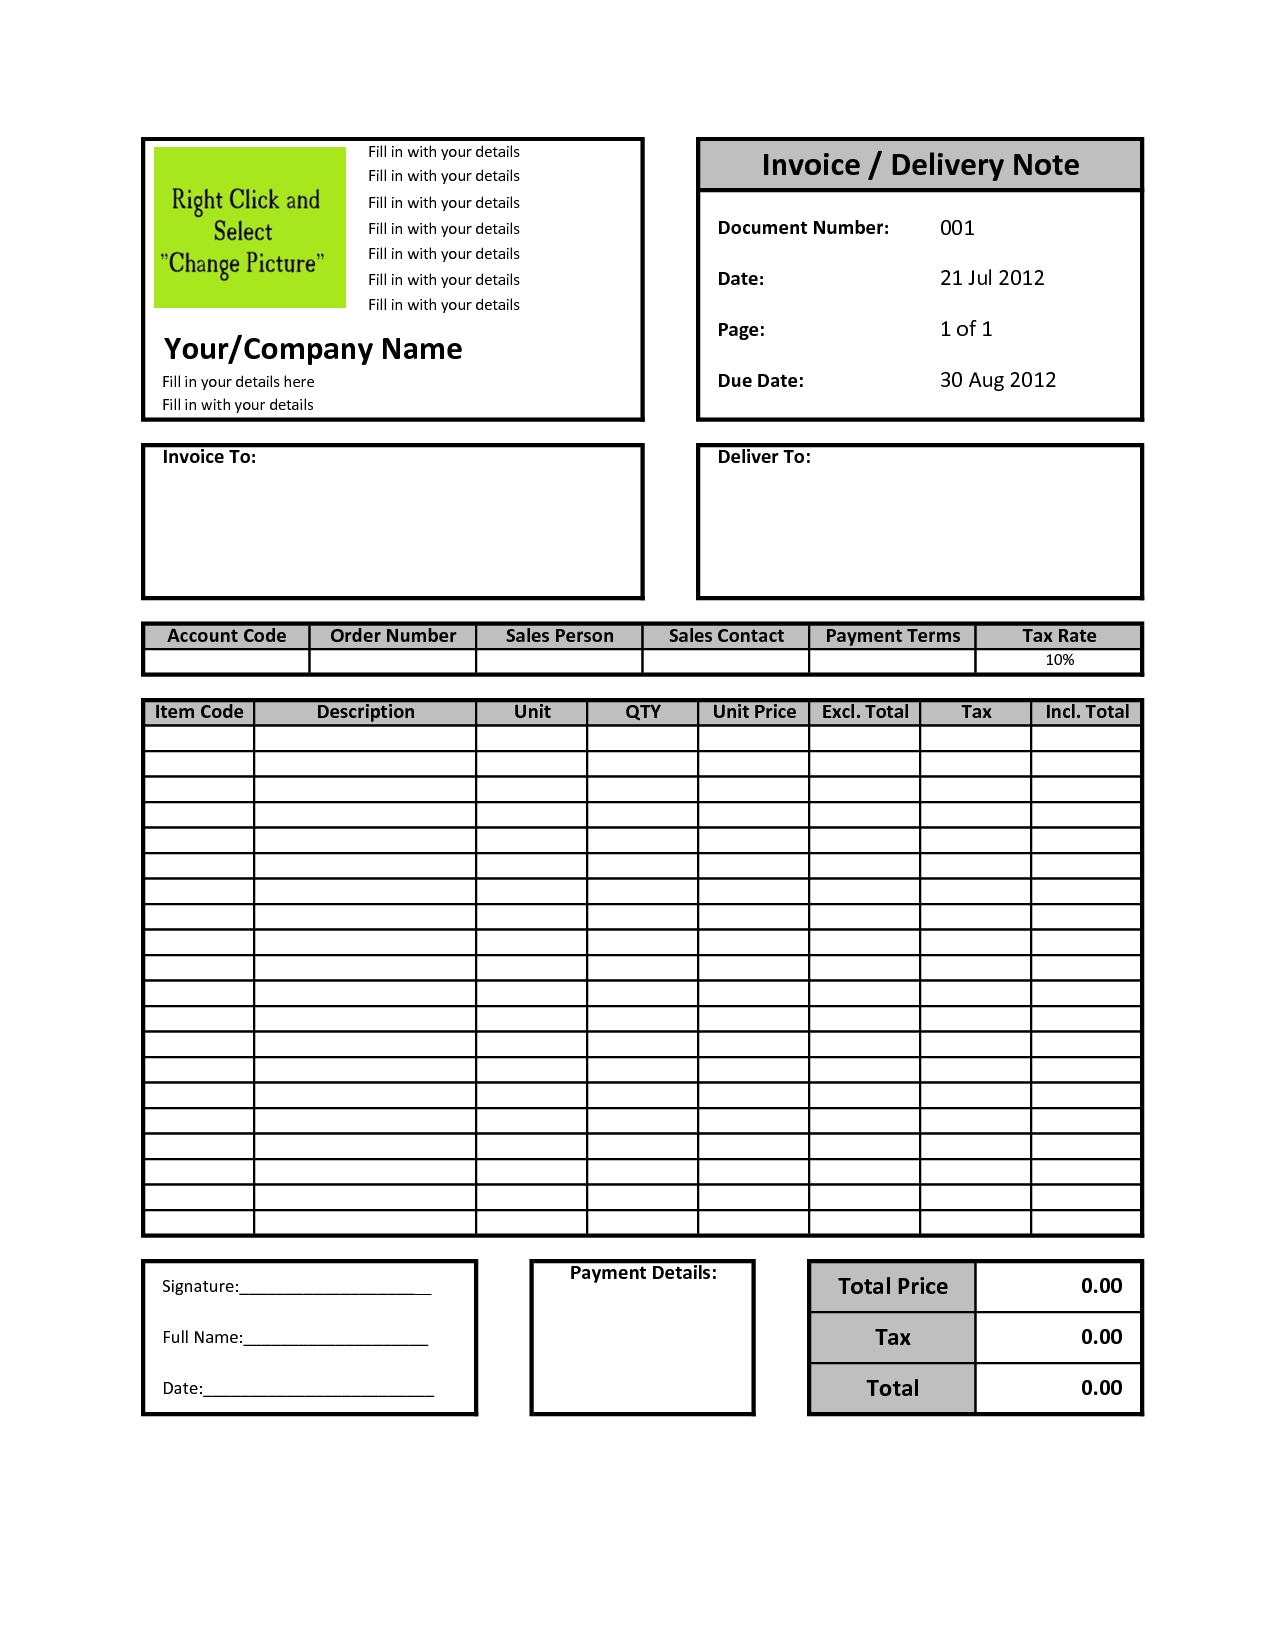 billing invoice template excel employmen invoice template excel download